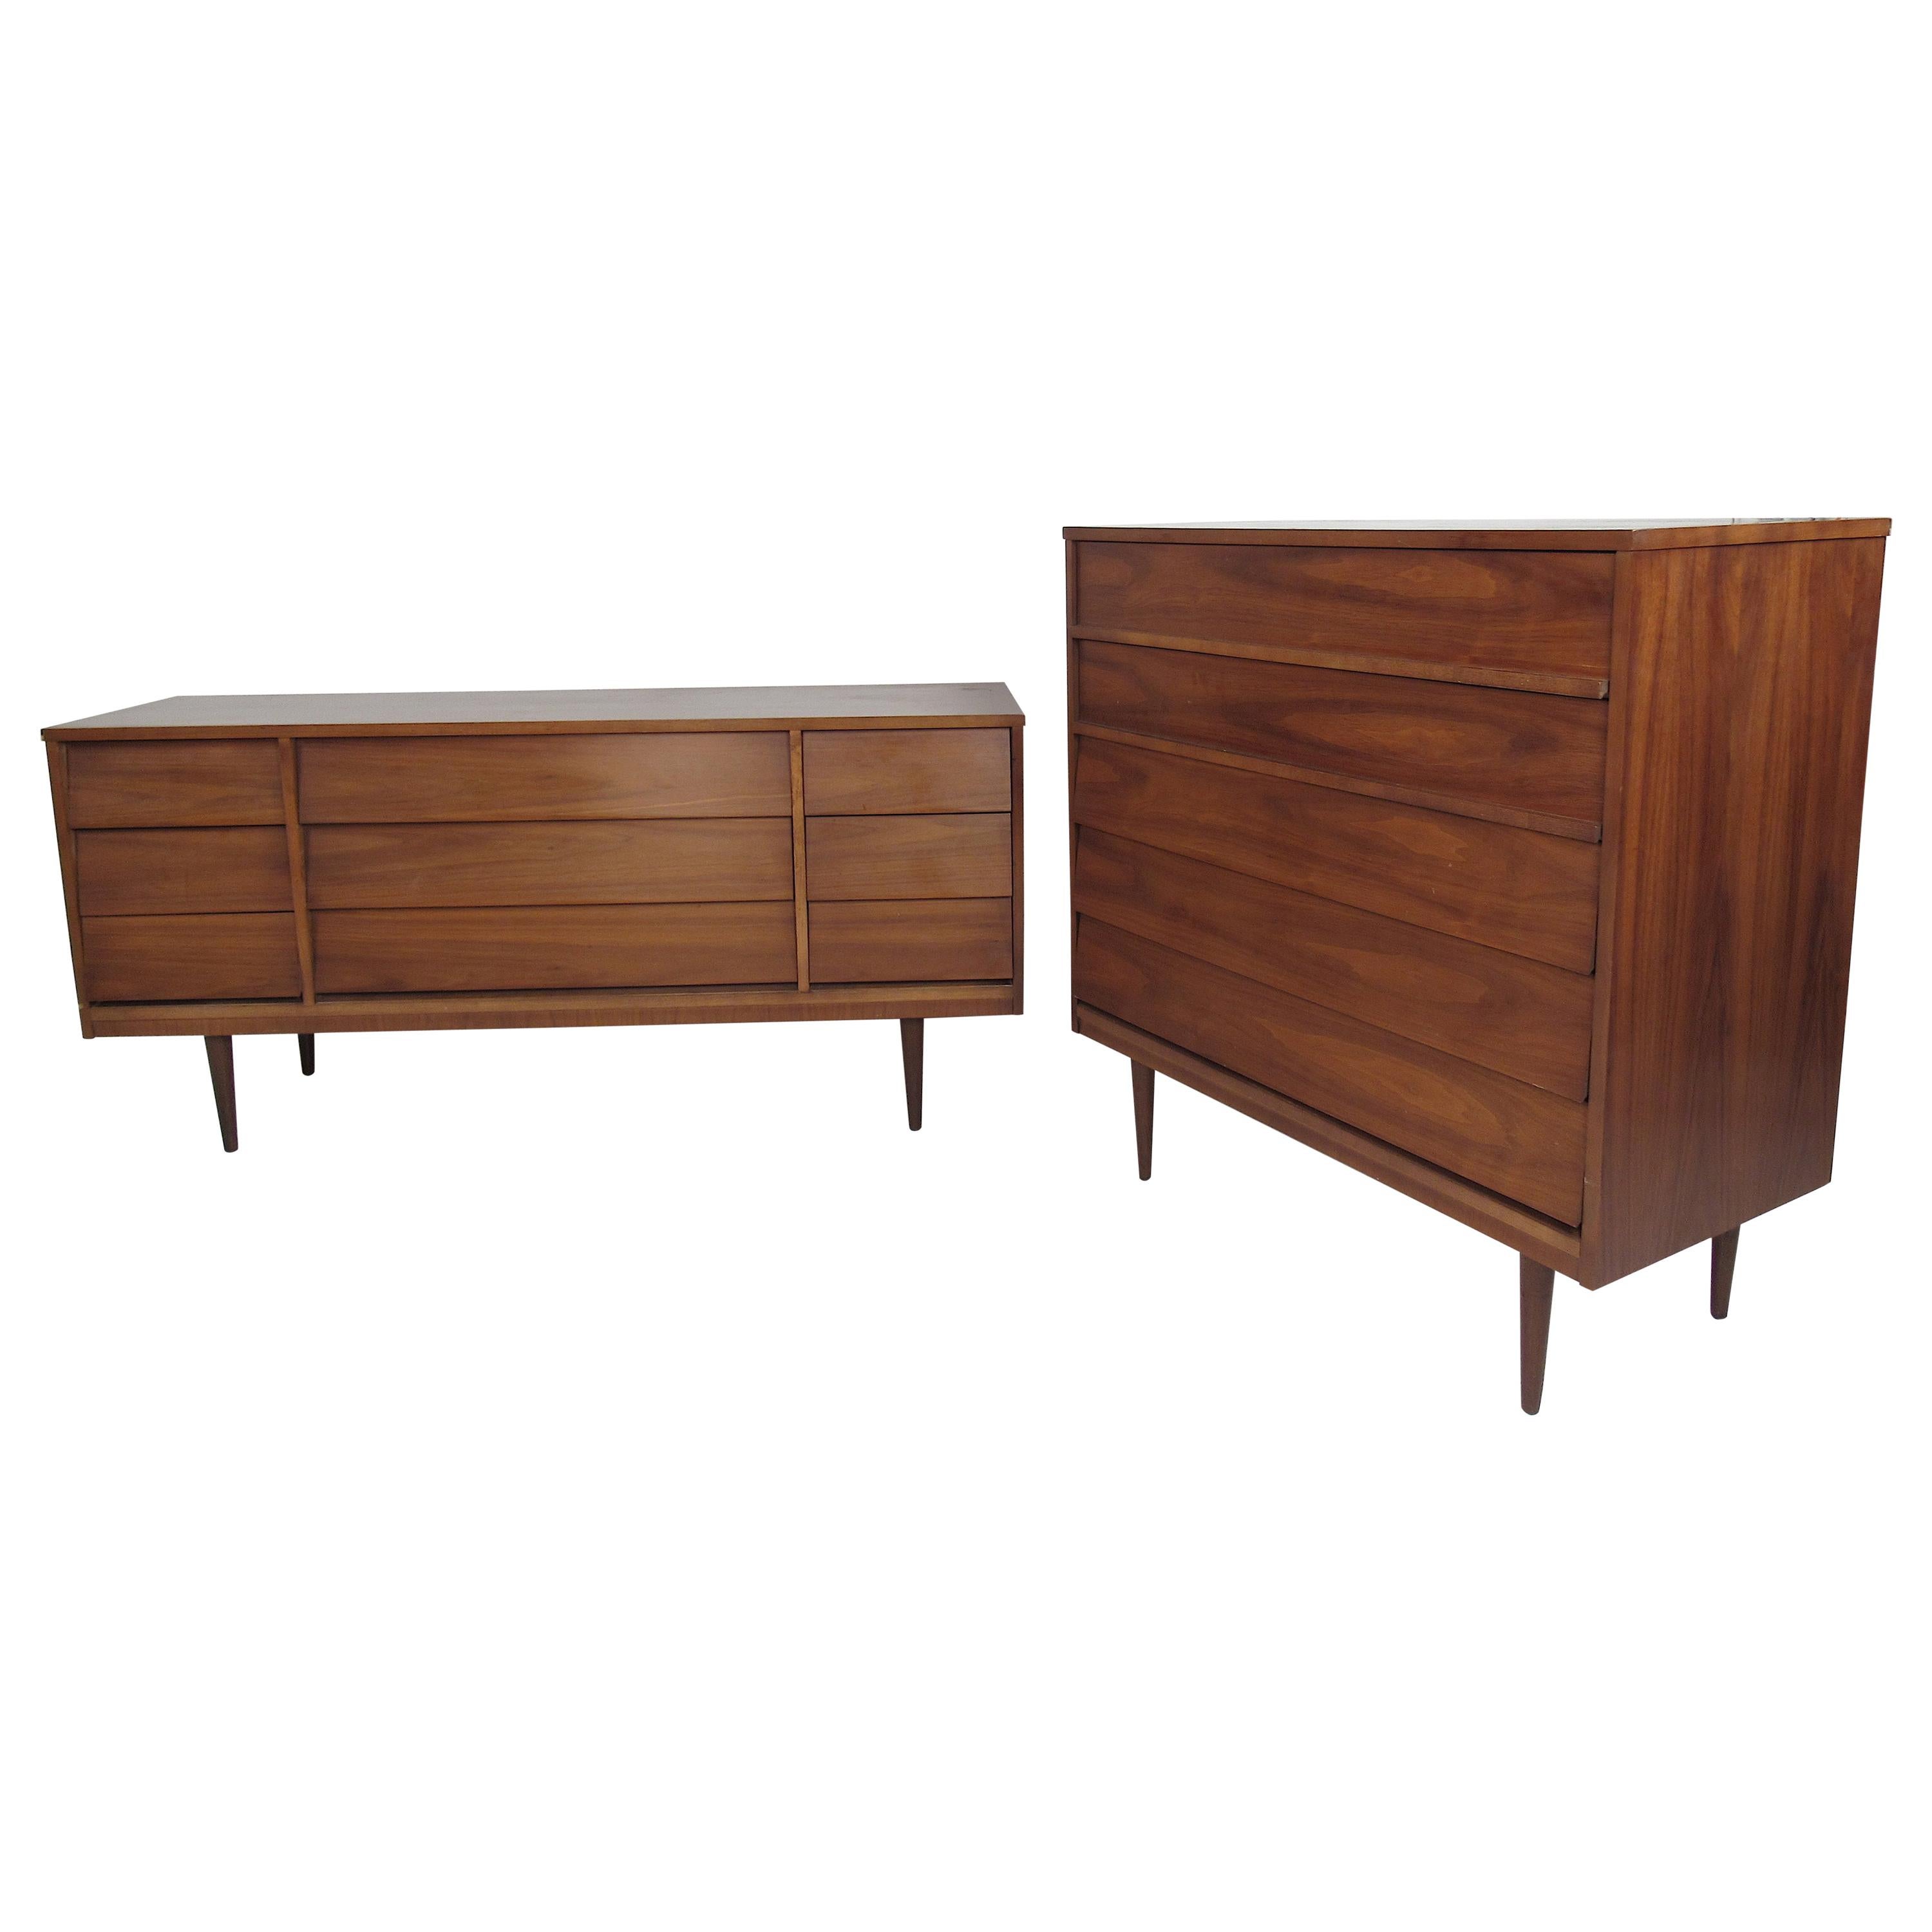 Pair of Midcentury American Walnut Dressers by Dixie Furniture